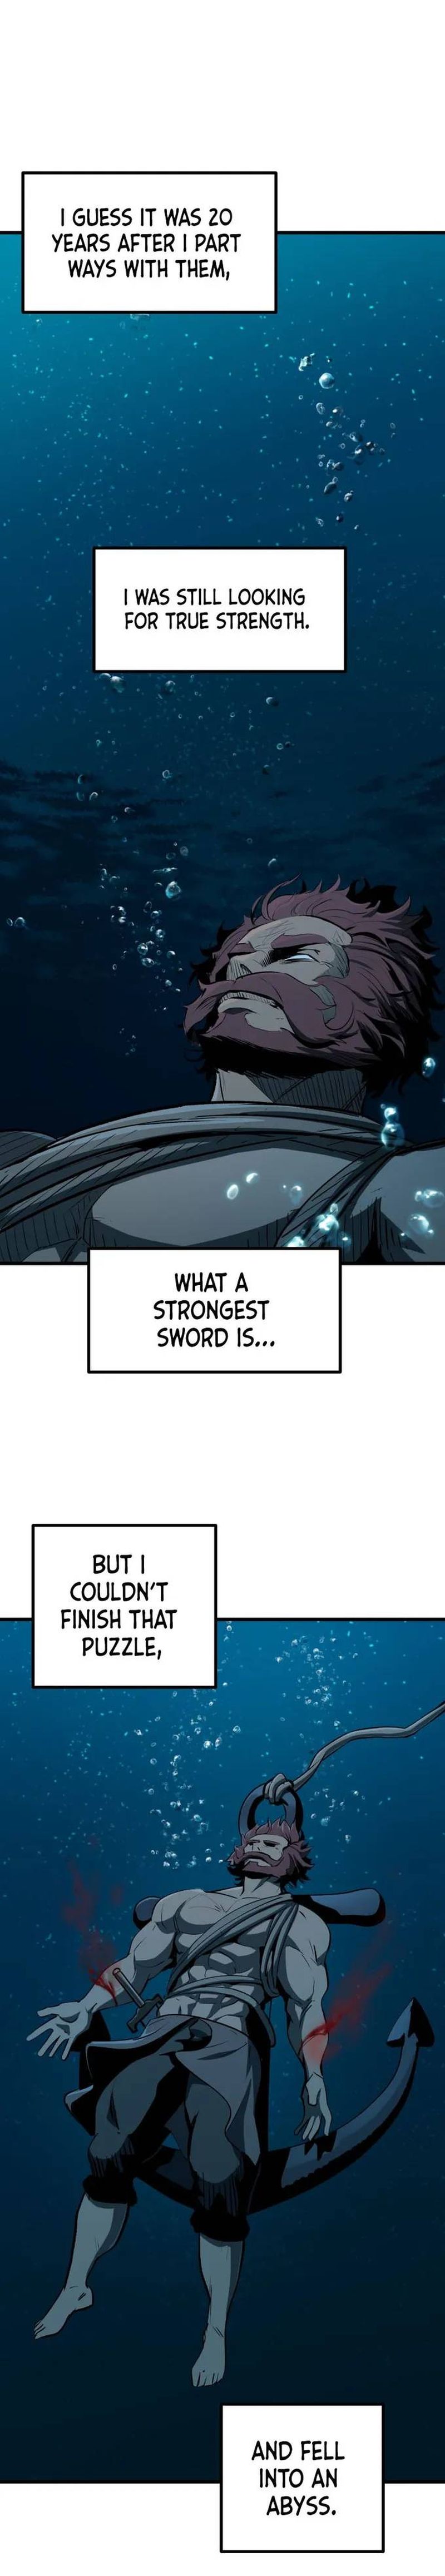 survival_story_of_a_sword_king_in_a_fantasy_world_124_12